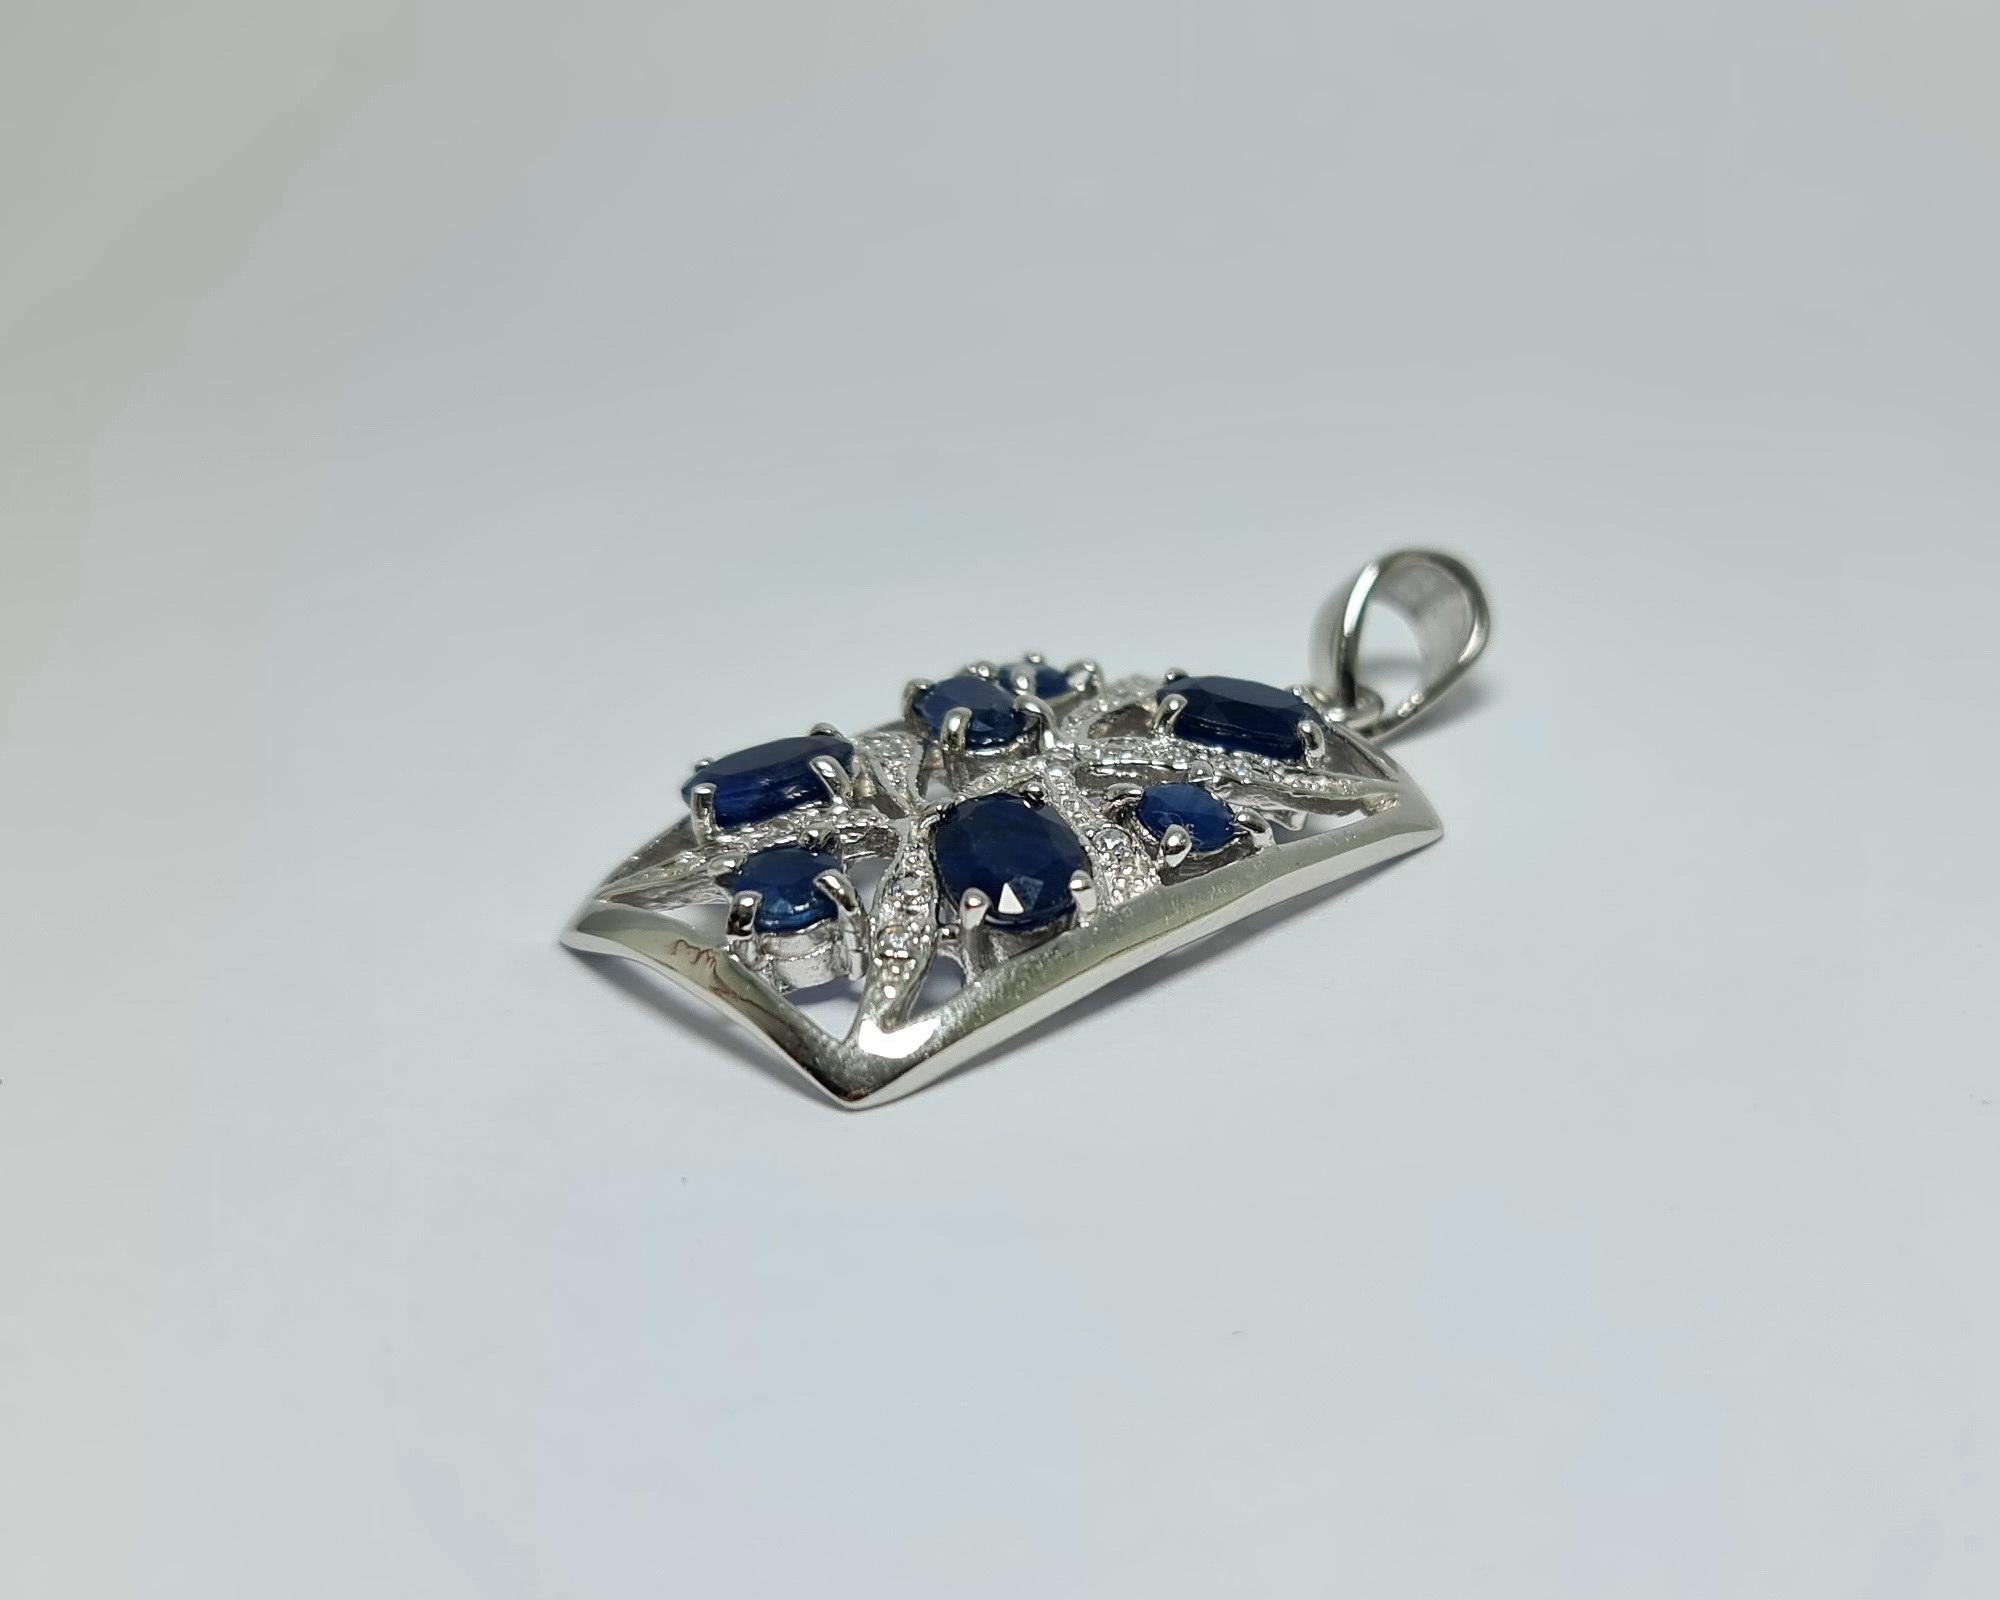 4.5 Ct Natural Thailand Untreated Blue Sapphire Pendant set in .925 Sterling Silver Rhodium Plated Pendant 